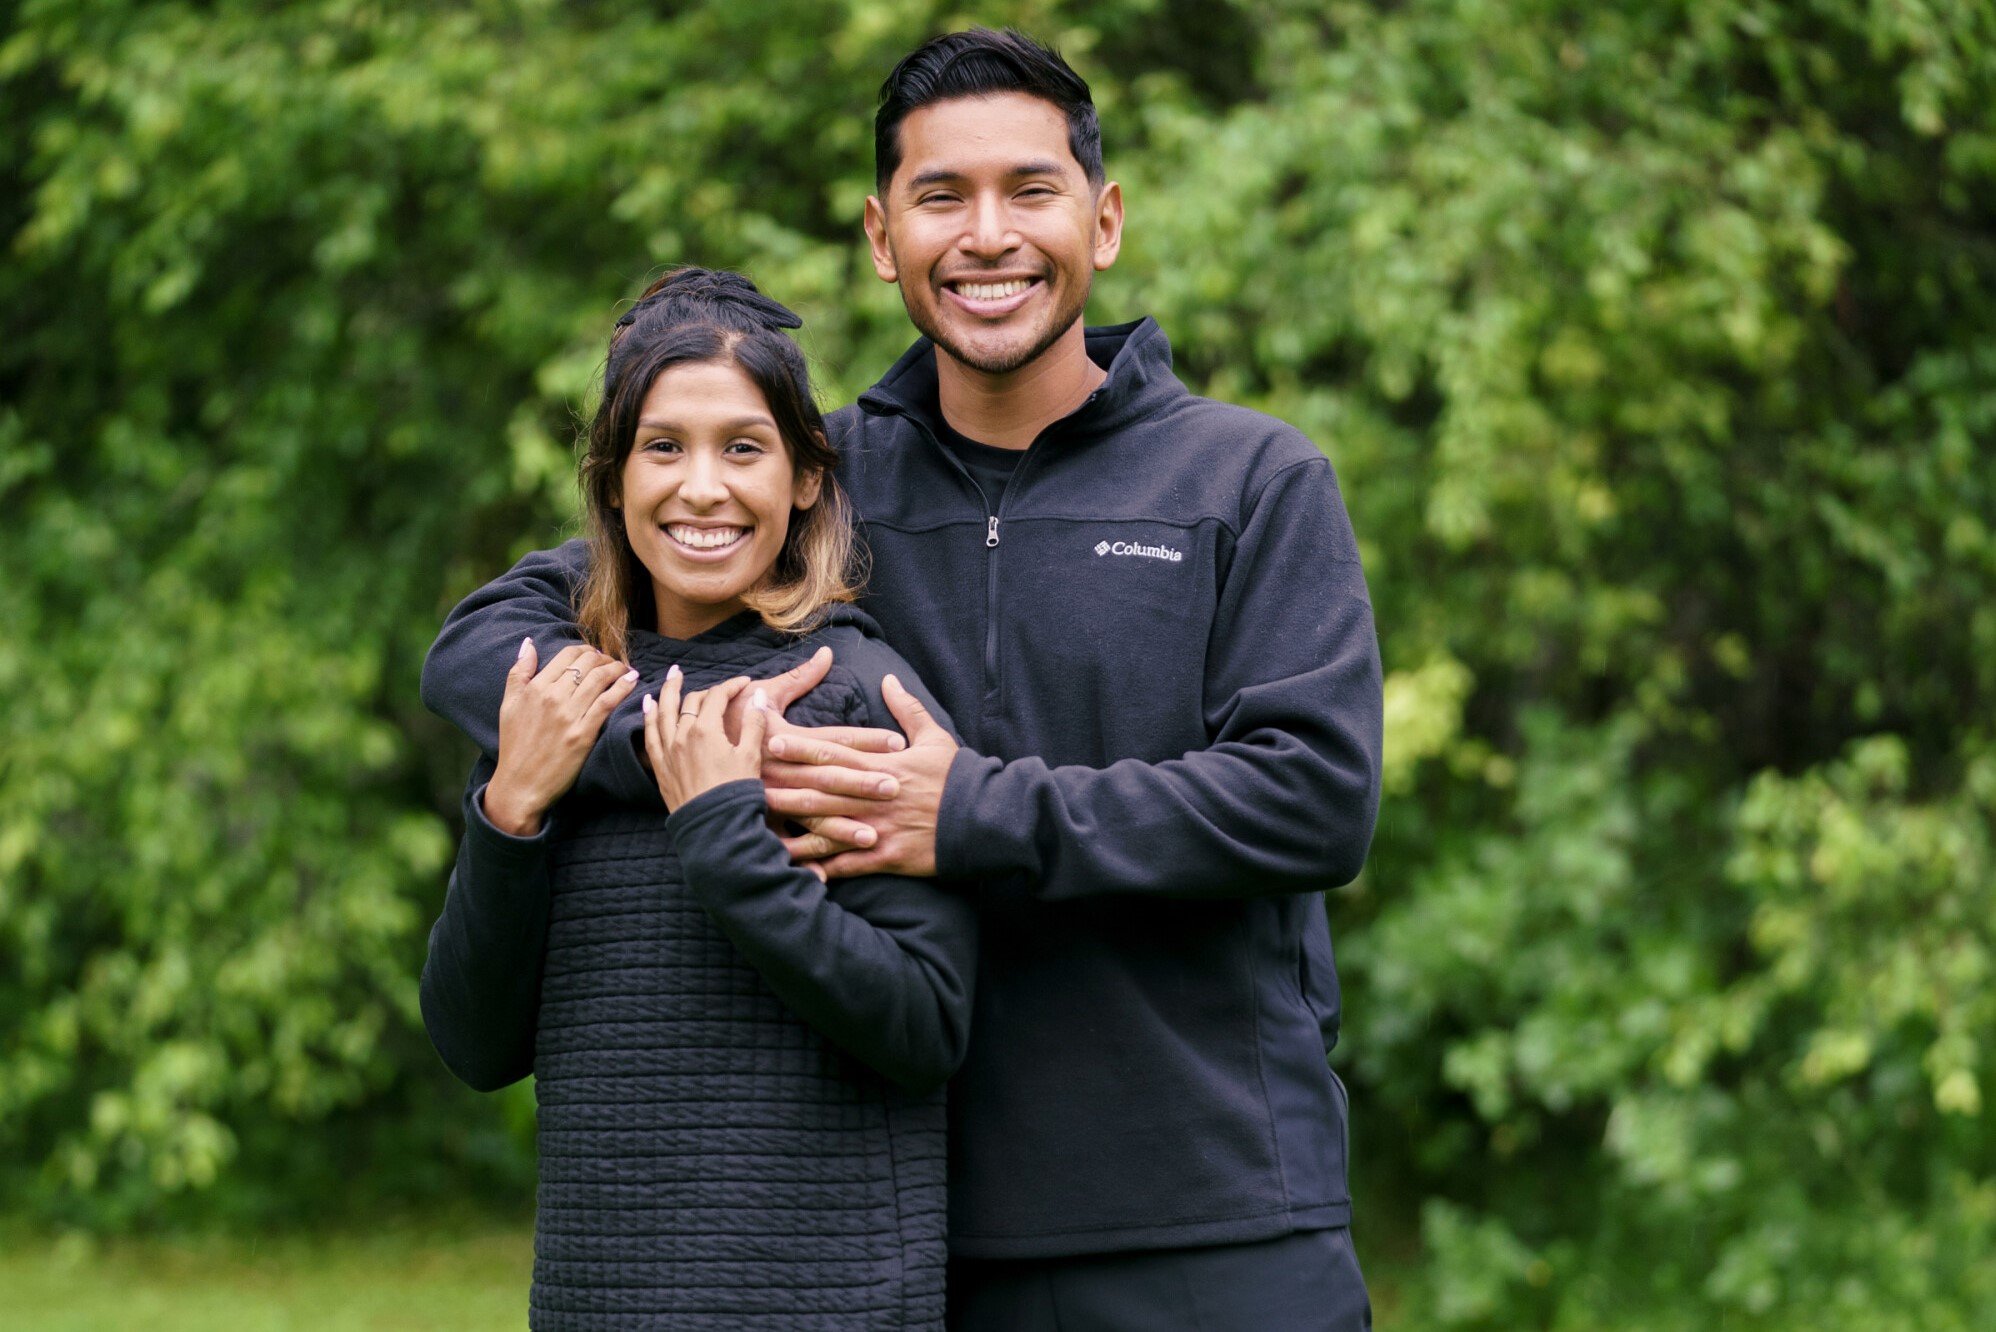 Aubrey Ares and David Hernandez, who are a part of the cast of 'The Amazing Race' Season 34 on CBS, wear black jackets and pose for promotional pictures.